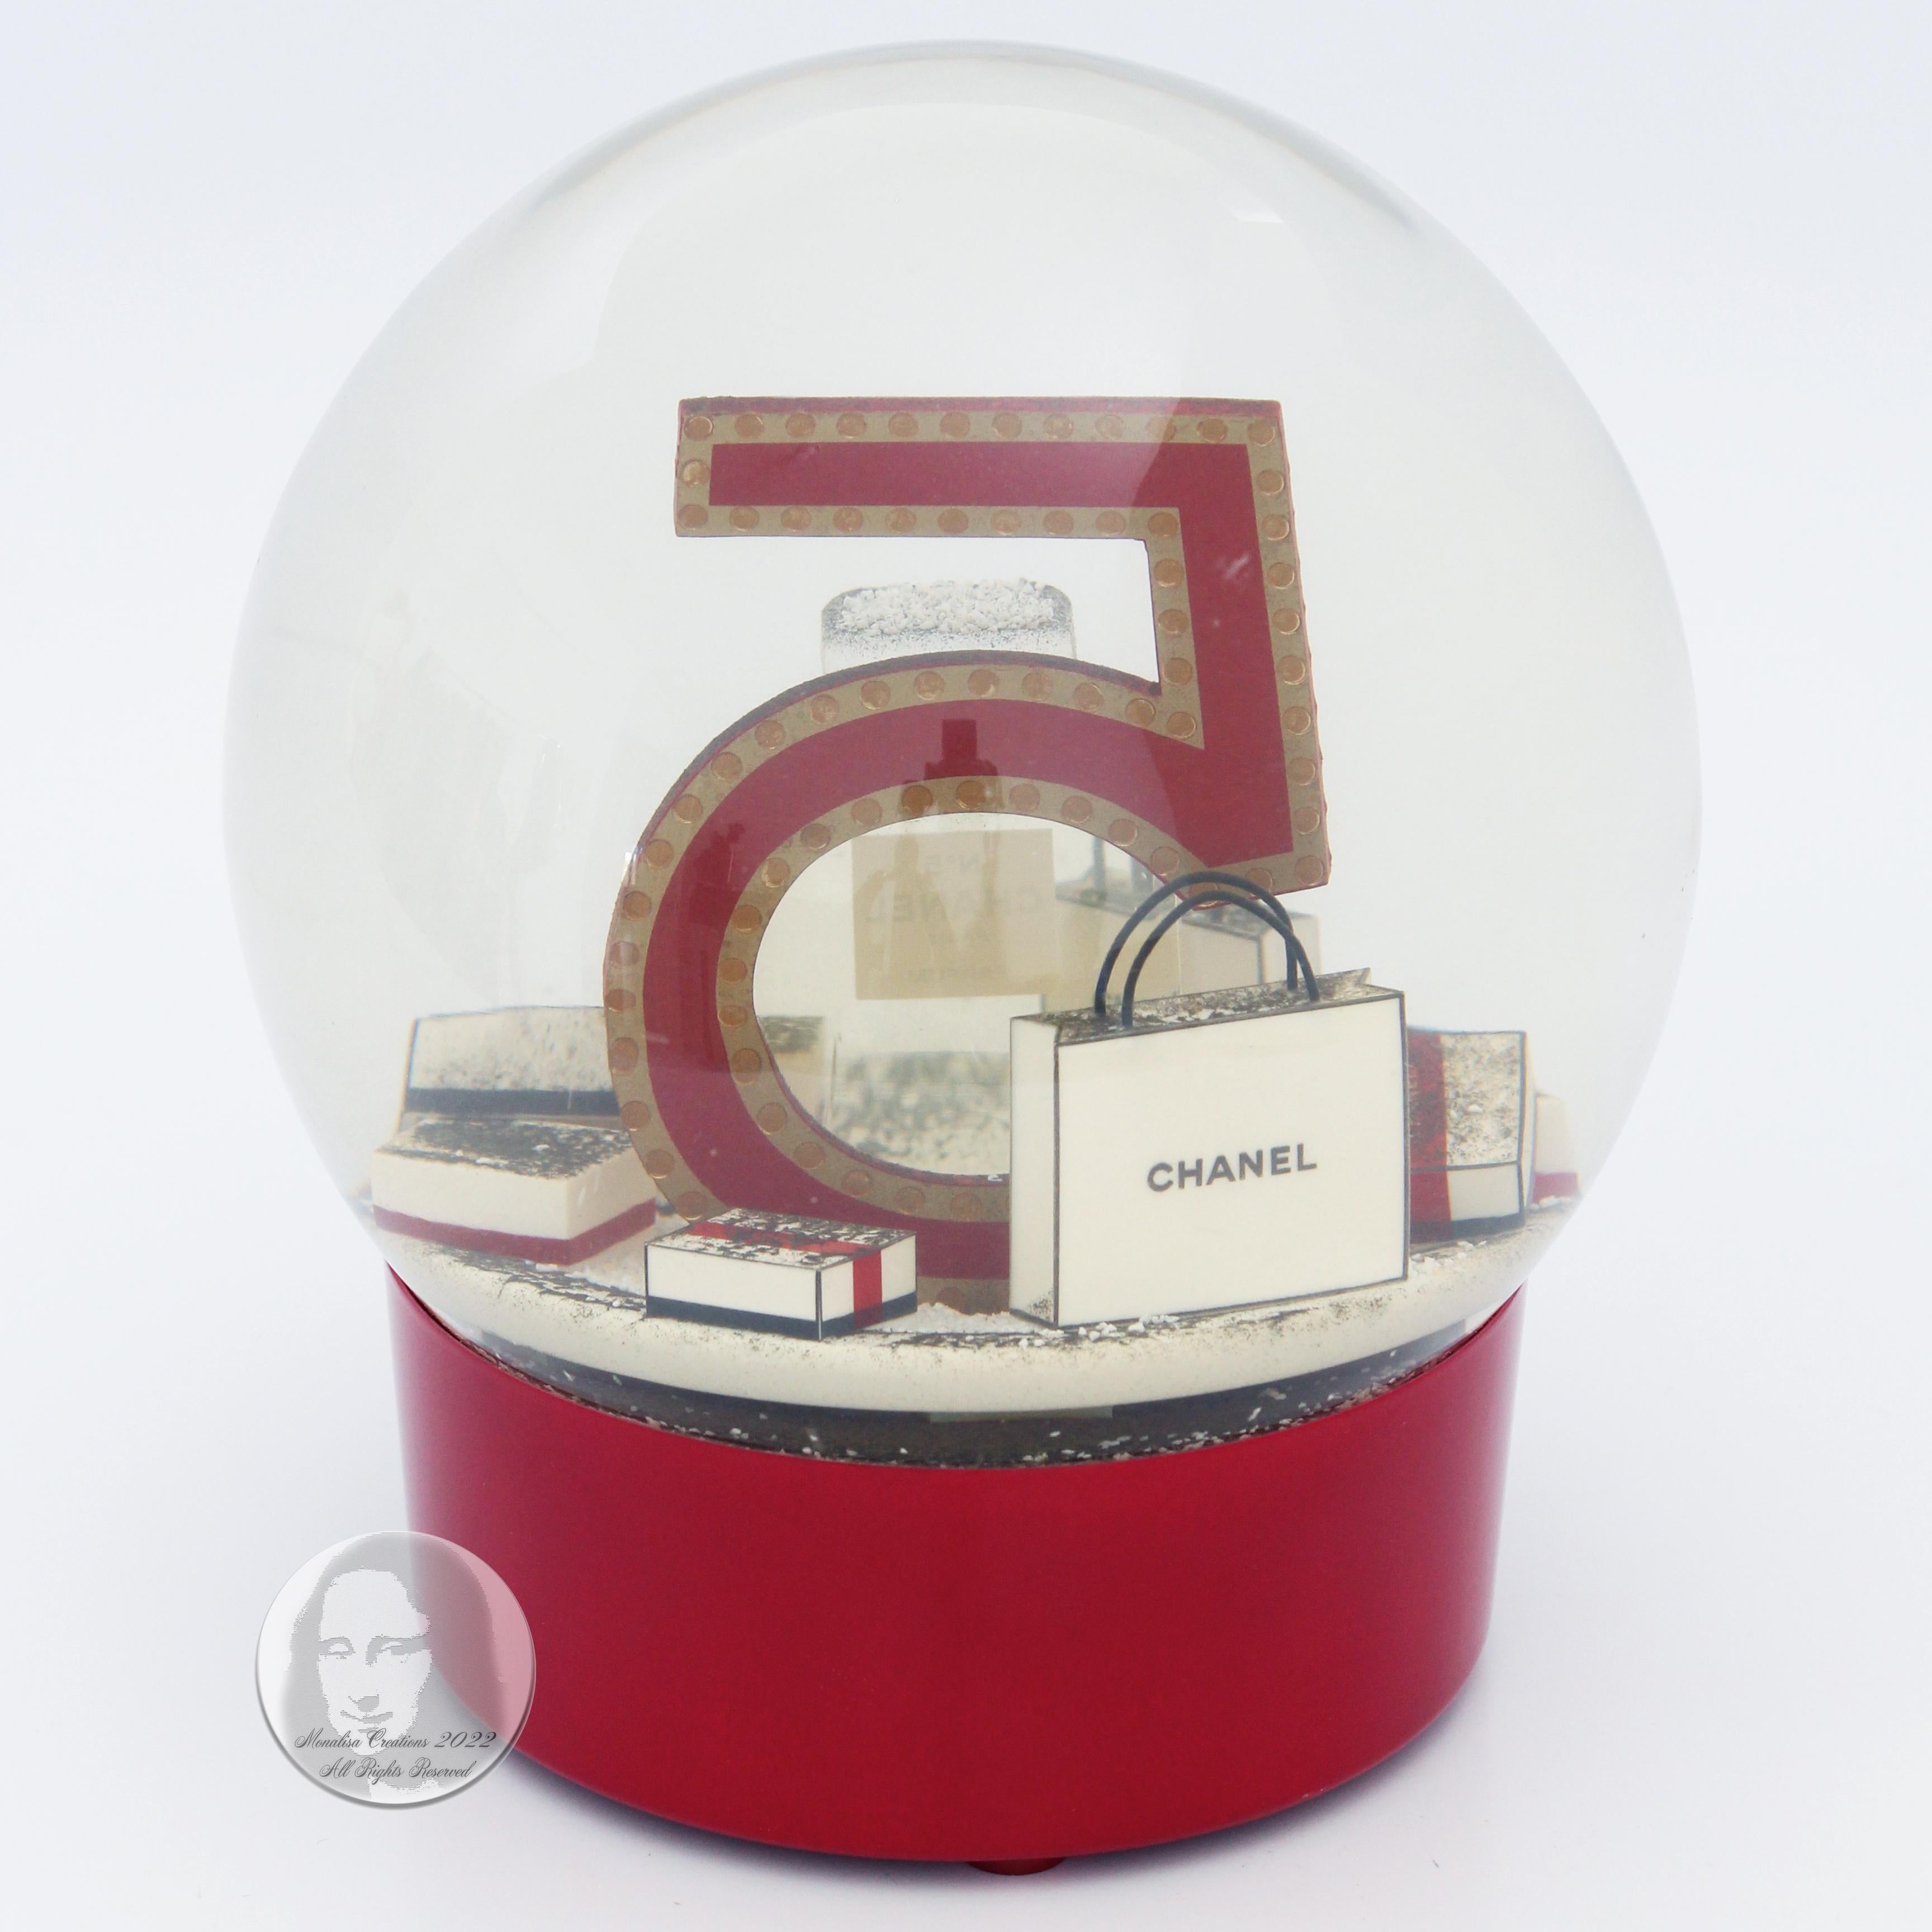 Chanel Snow Globe 2015 Large Shopping Bags No 5 Bottle Home Decor Limited in Box 1